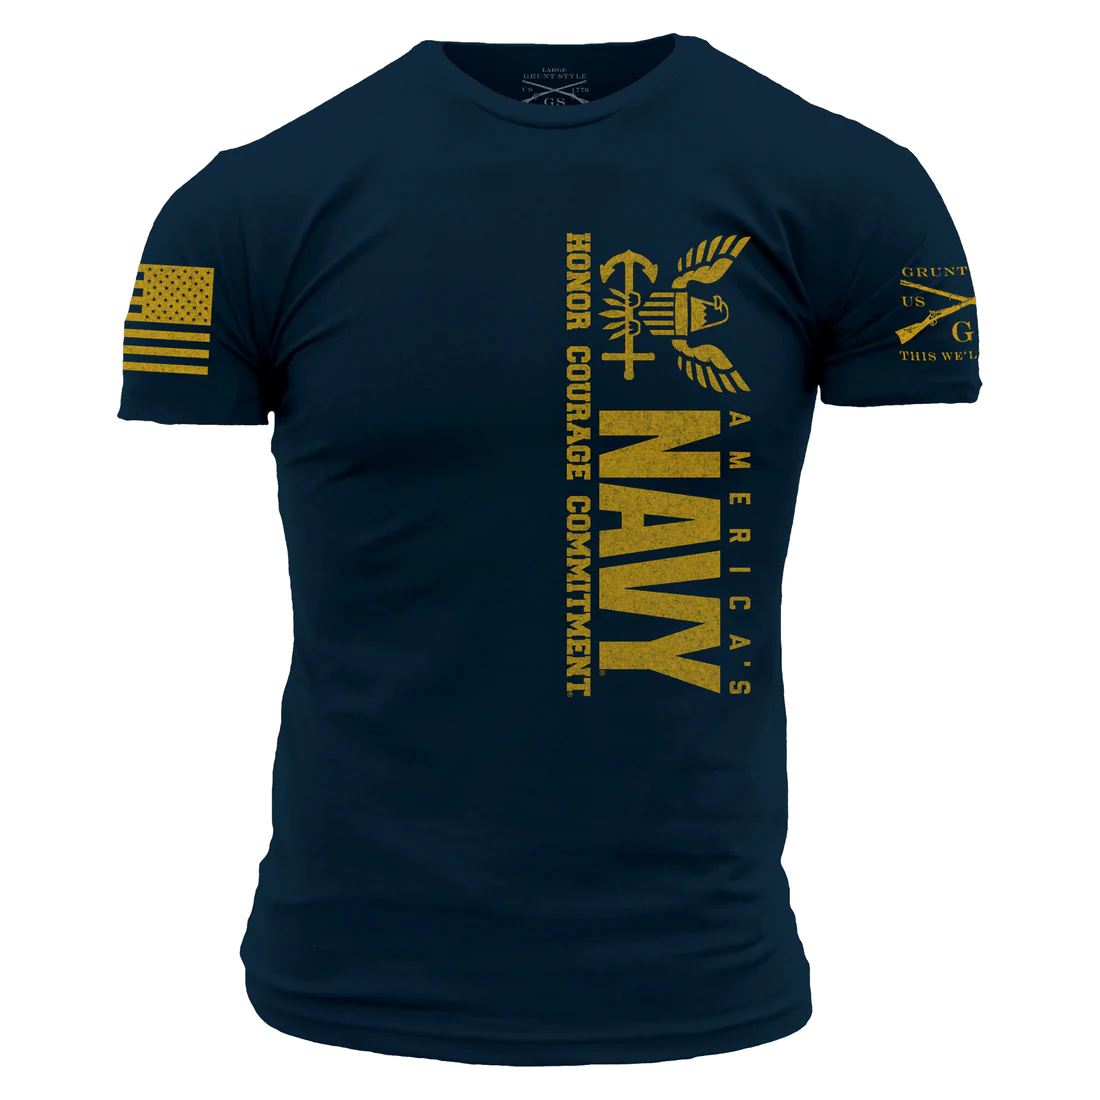 Grunt Style Men's America's Navy Tee posted by ProdOrigin USA in Men's Apparel